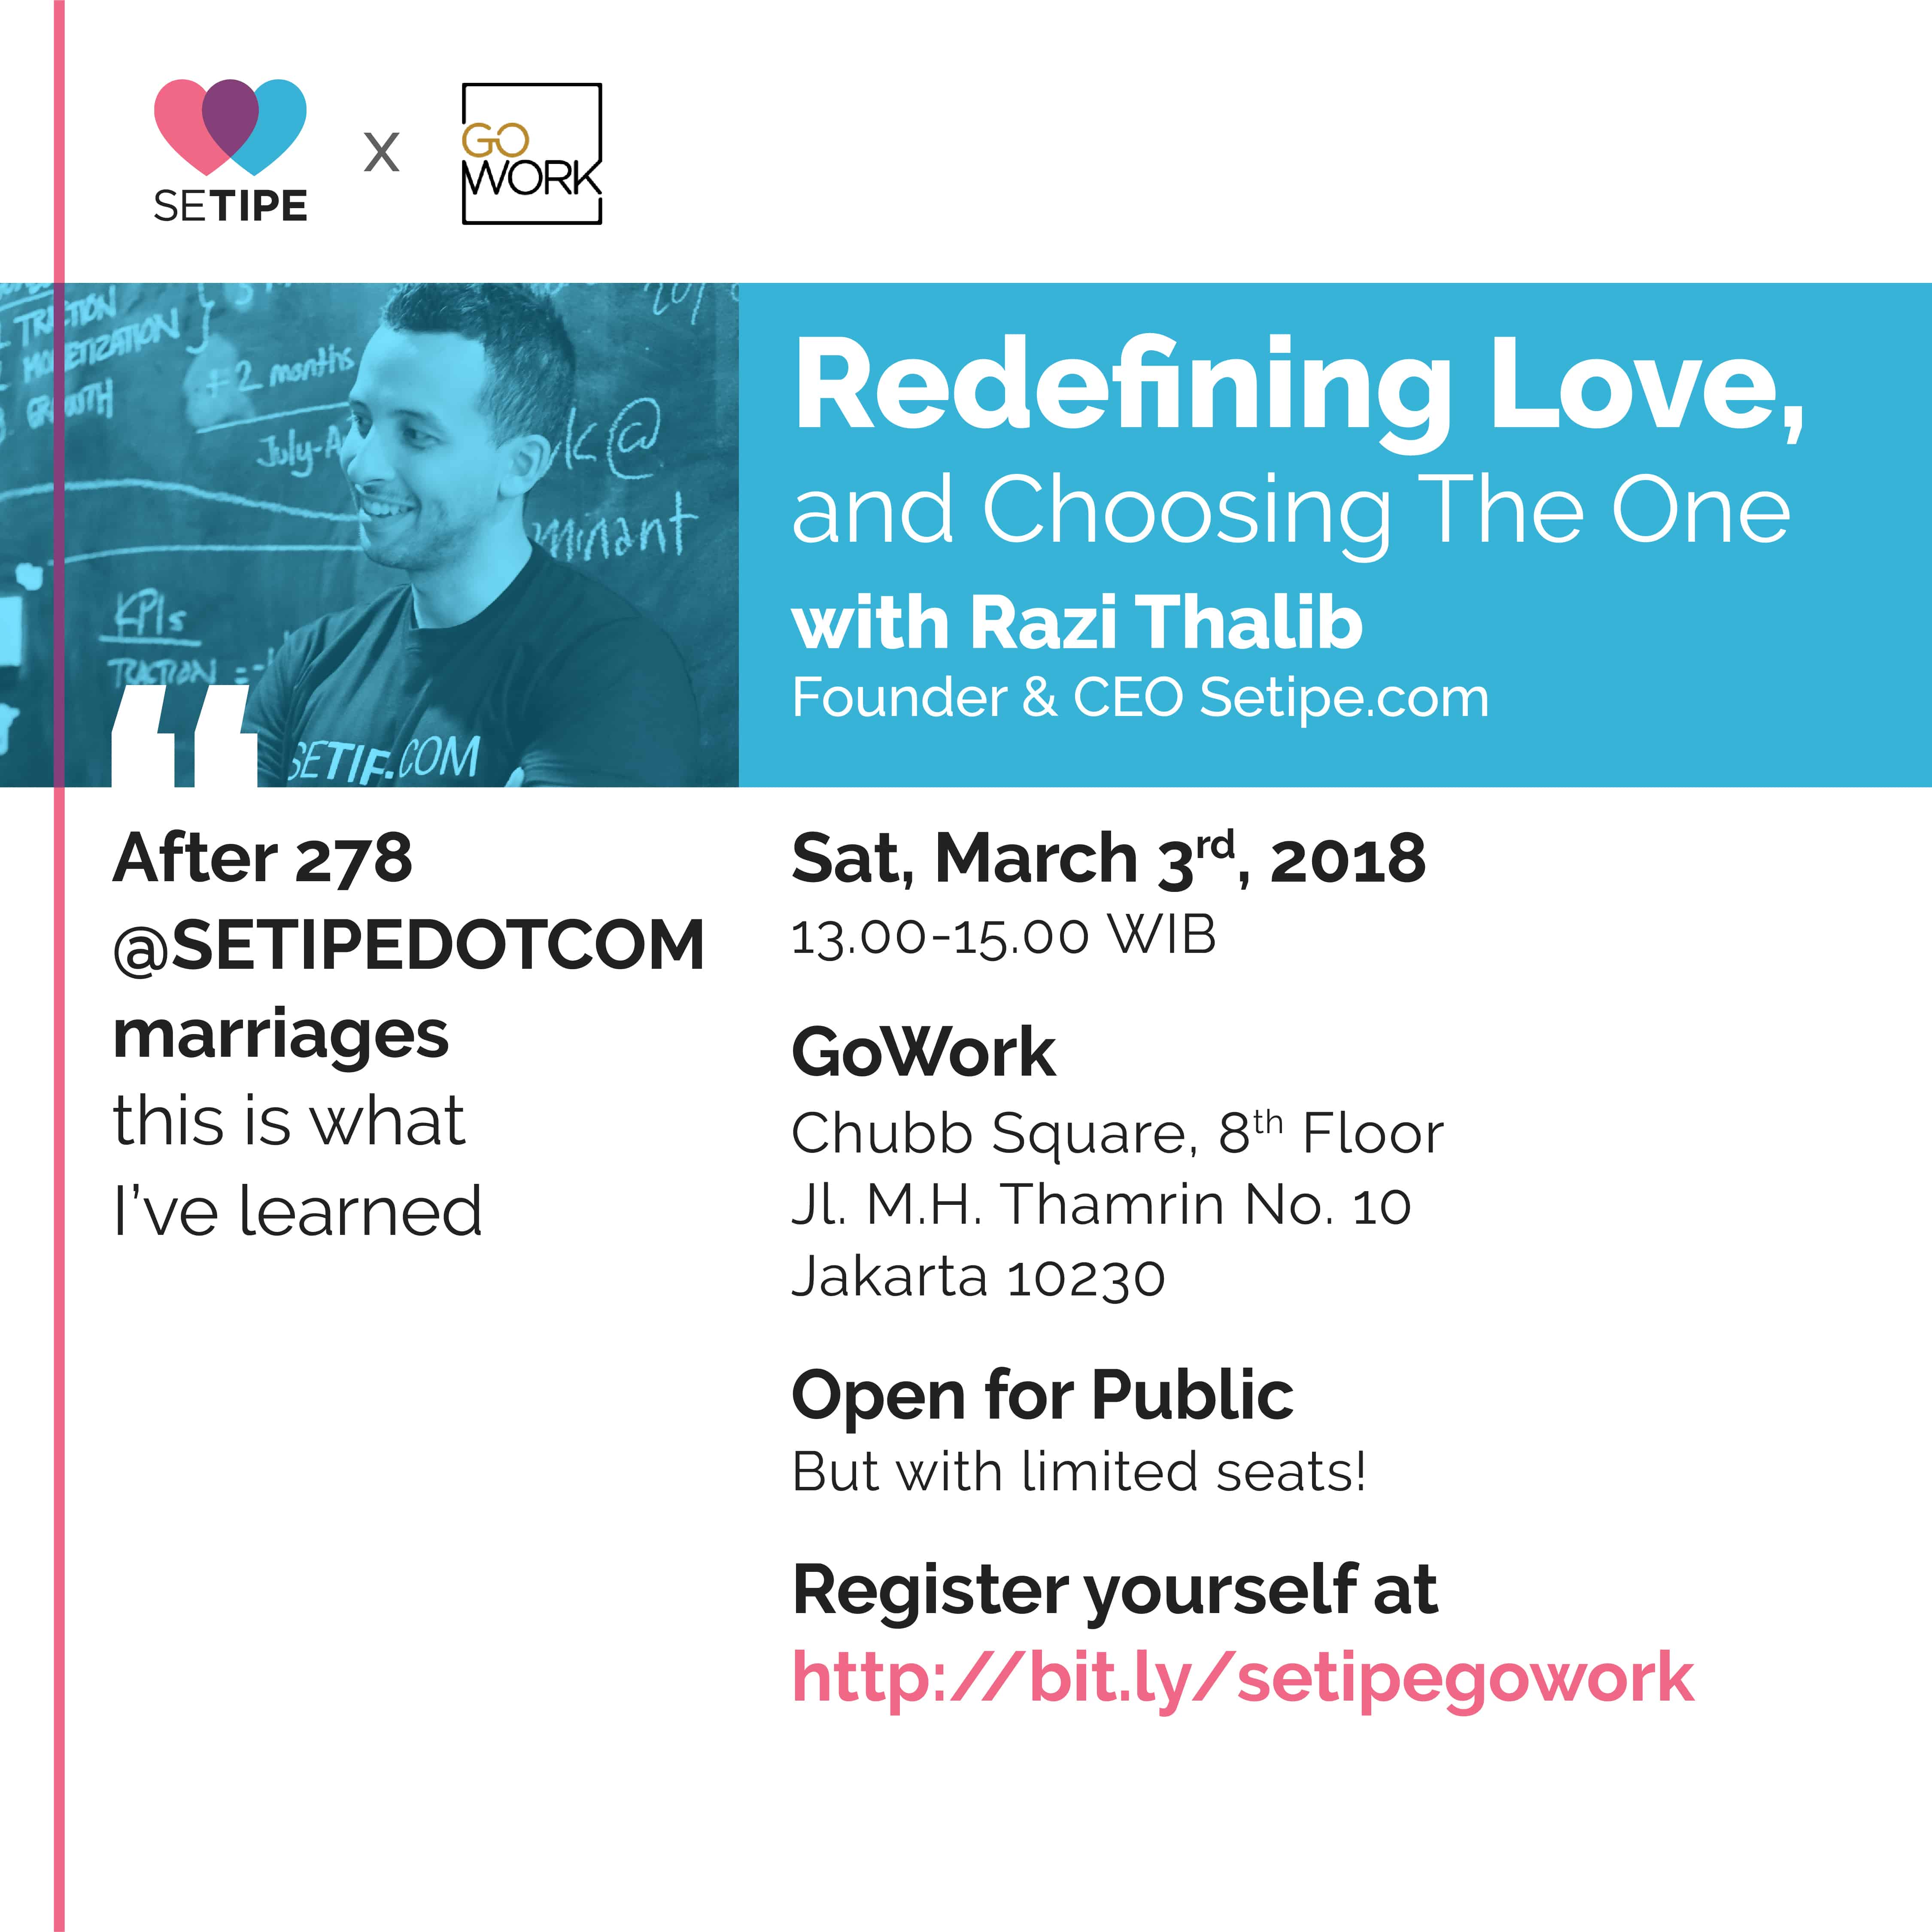 GoWork x Setipe.com: Redefining Love and Choosing The One (3 March 2018)